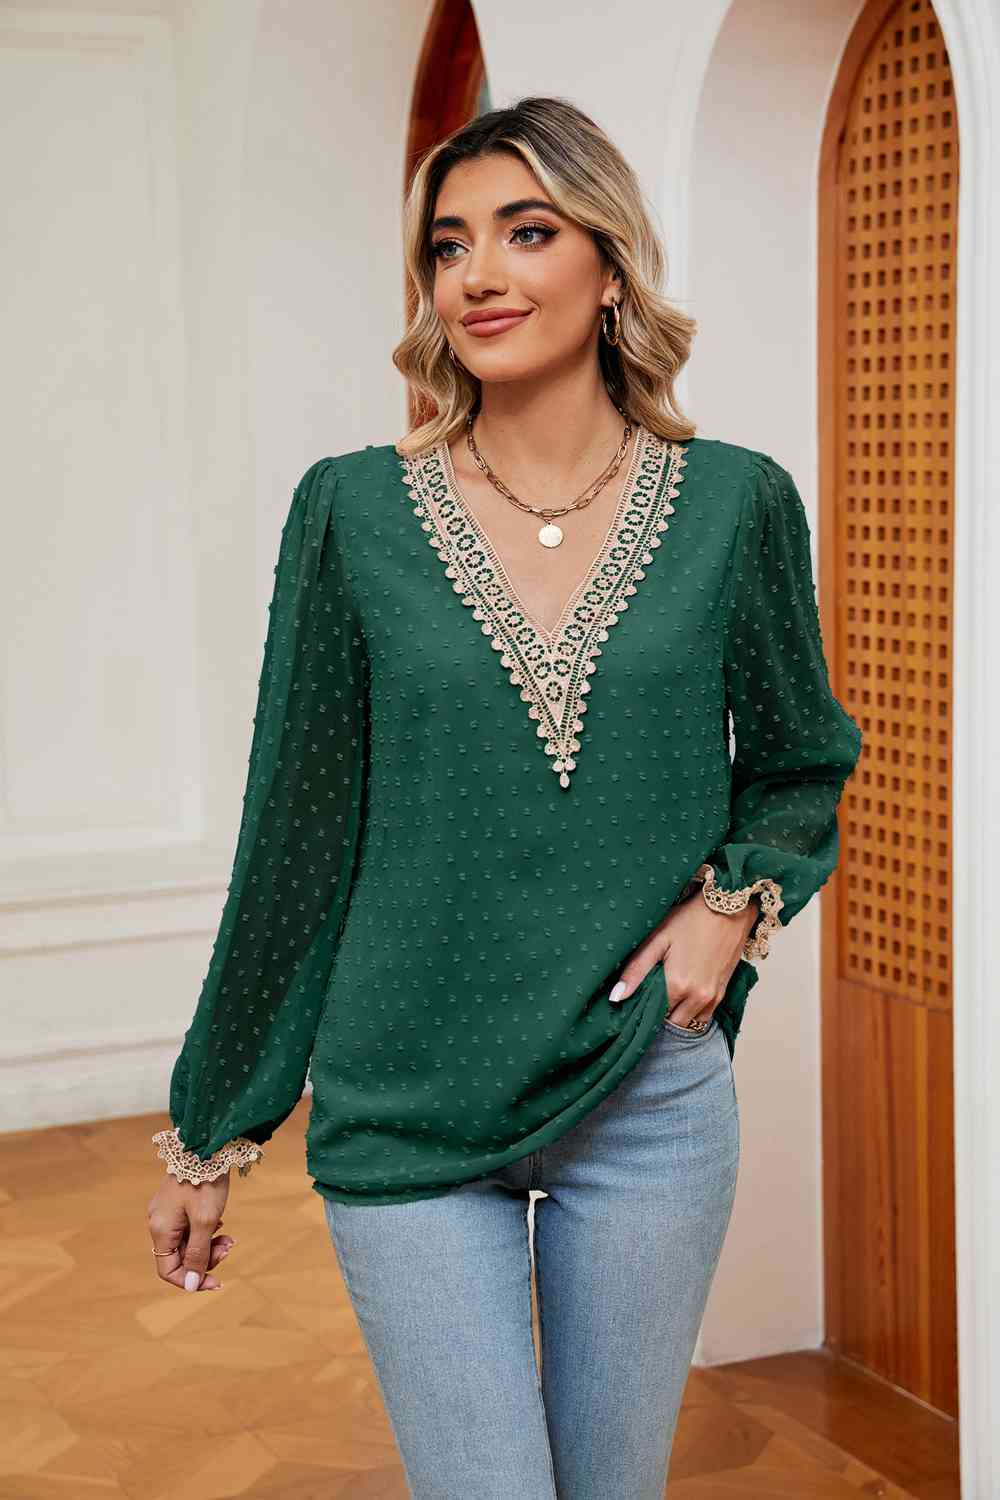 Swiss Dot Contrast V-Neck Blouse (6 Colors) Shirts & Tops Krazy Heart Designs Boutique Green S 